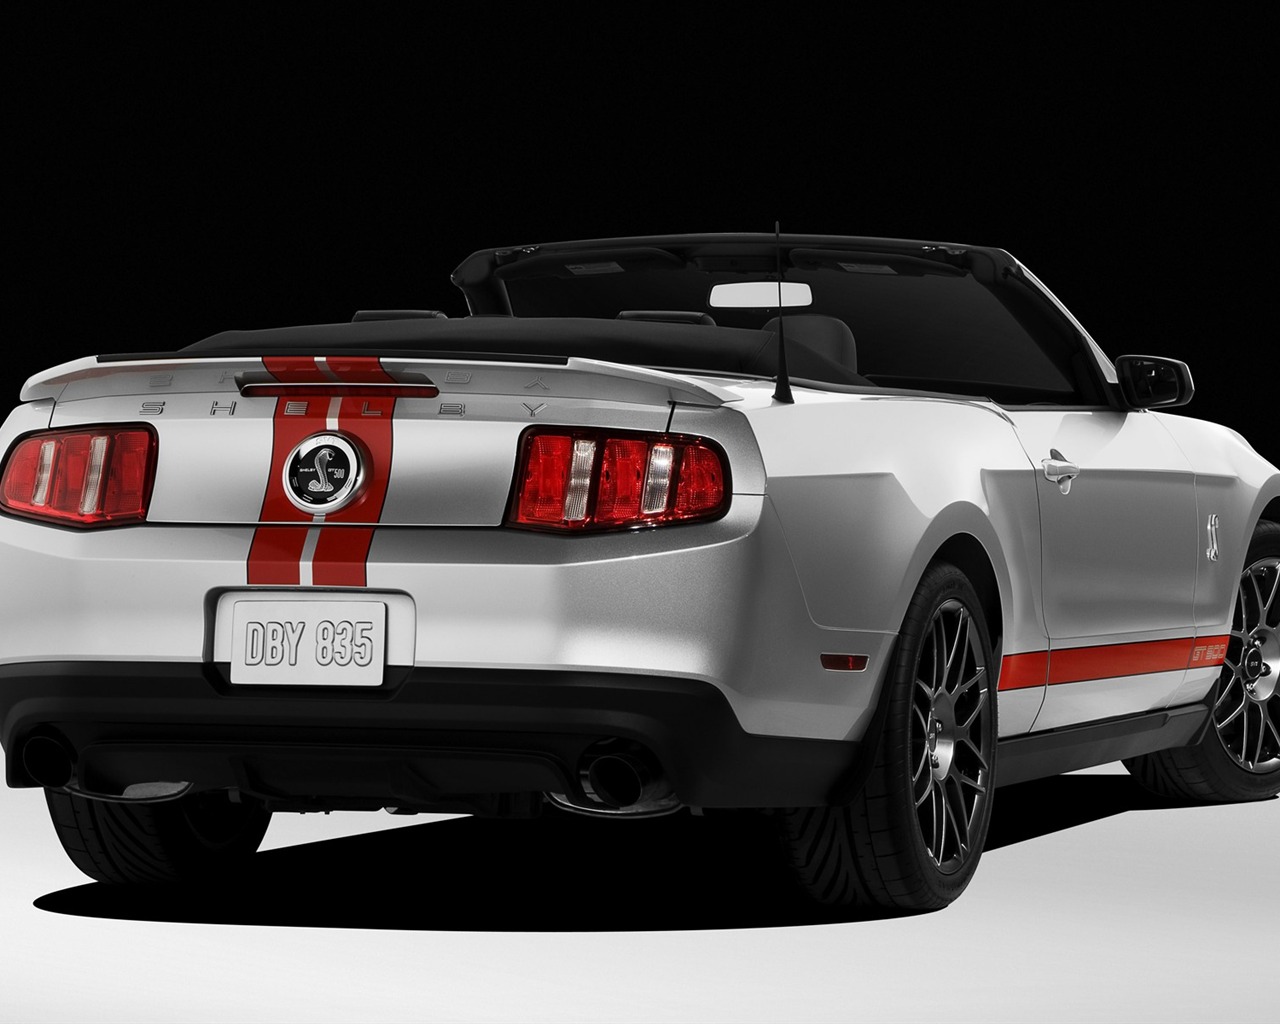 Ford Mustang GT500 Wallpapers #2 - 1280x1024